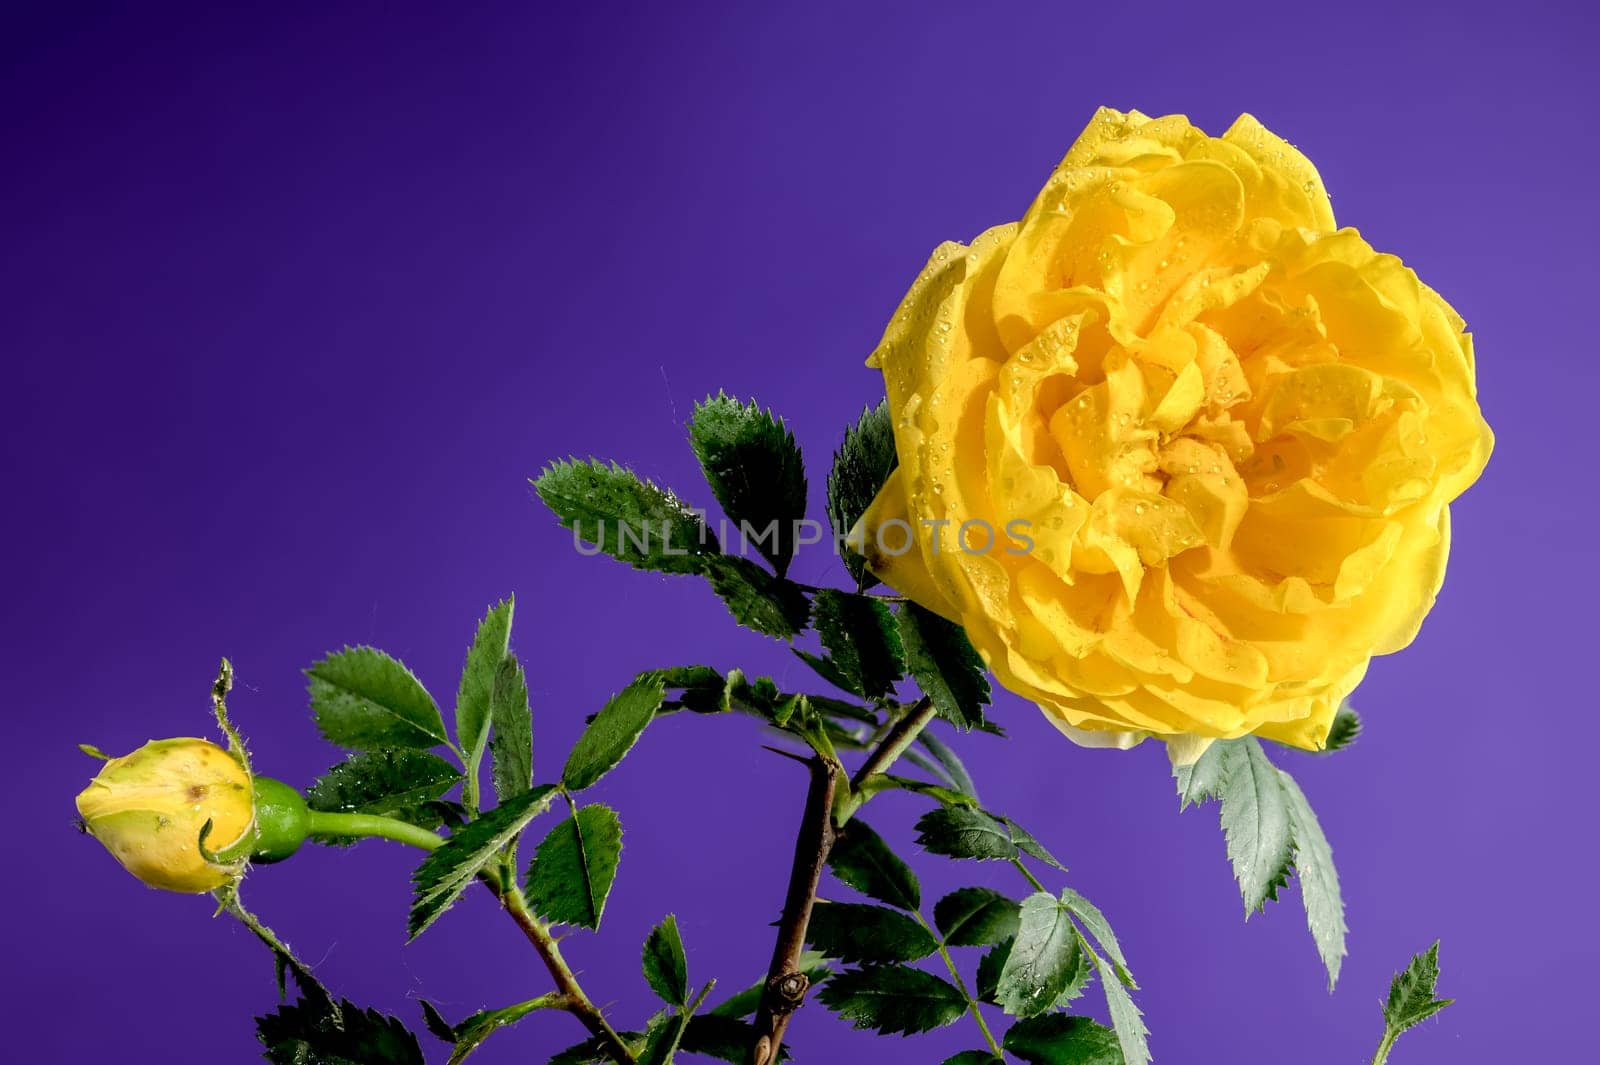 Beautiful Blooming yellow Climbing rose Golden Showers on a purple background. Flower head close-up.